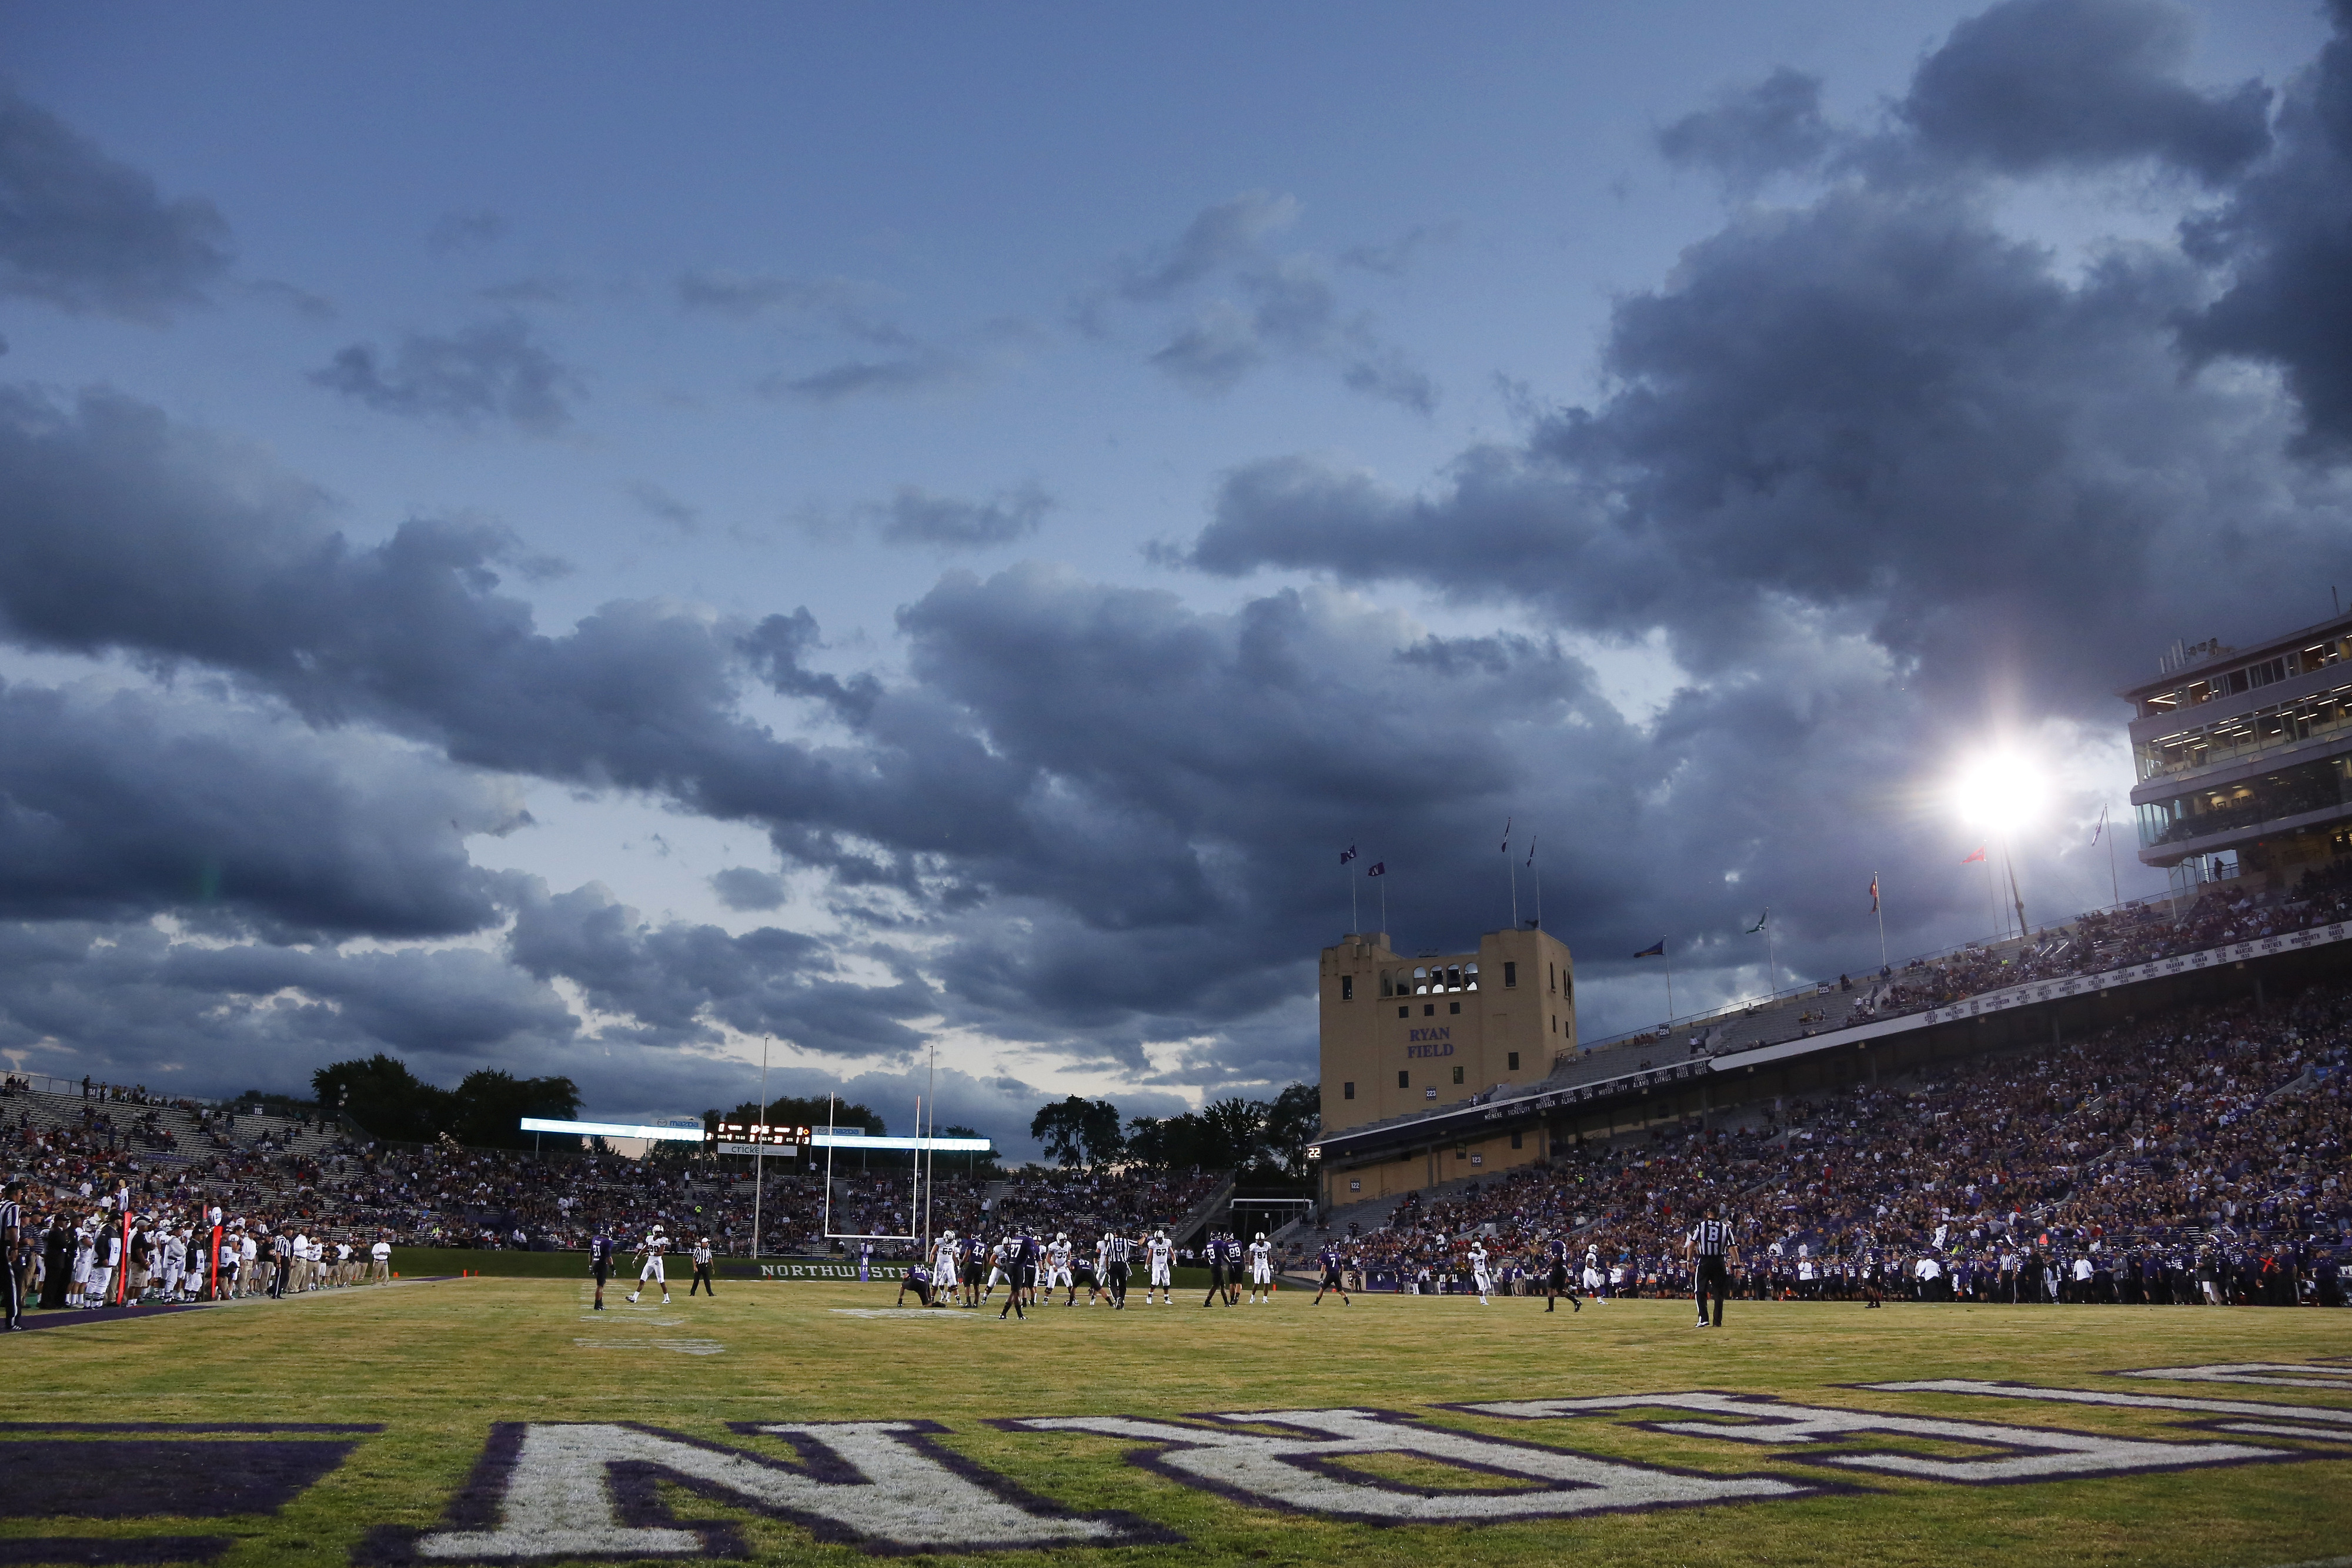 EVANSTON, IL - SEPTEMBER 8: General view of the sky after sunset during the game between the Northwestern Wildcats and Vanderbilt Commodores at Ryan Field on September 8, 2012 in Evanston, Illinois. (Photo by Joe Robbins/Getty Images)